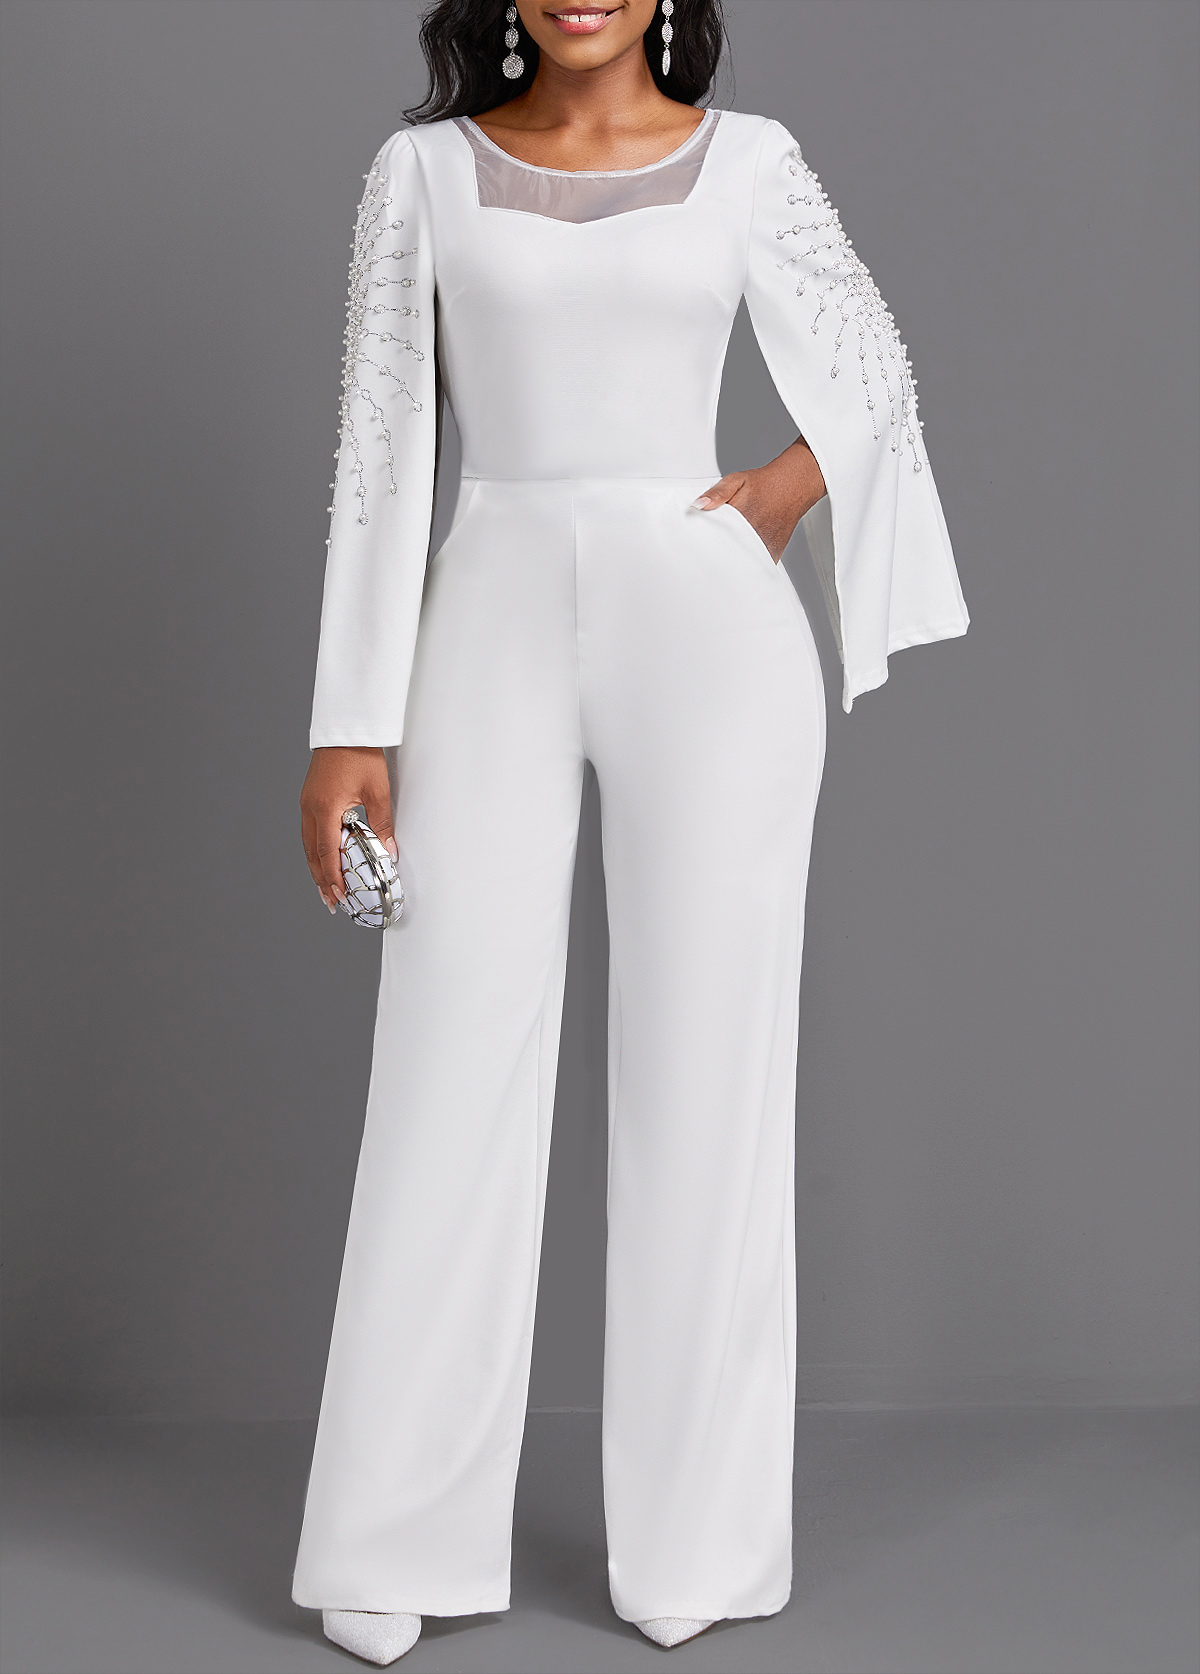 Beaded Long Round Neck White Jumpsuit | Rosewe.com - USD $38.98